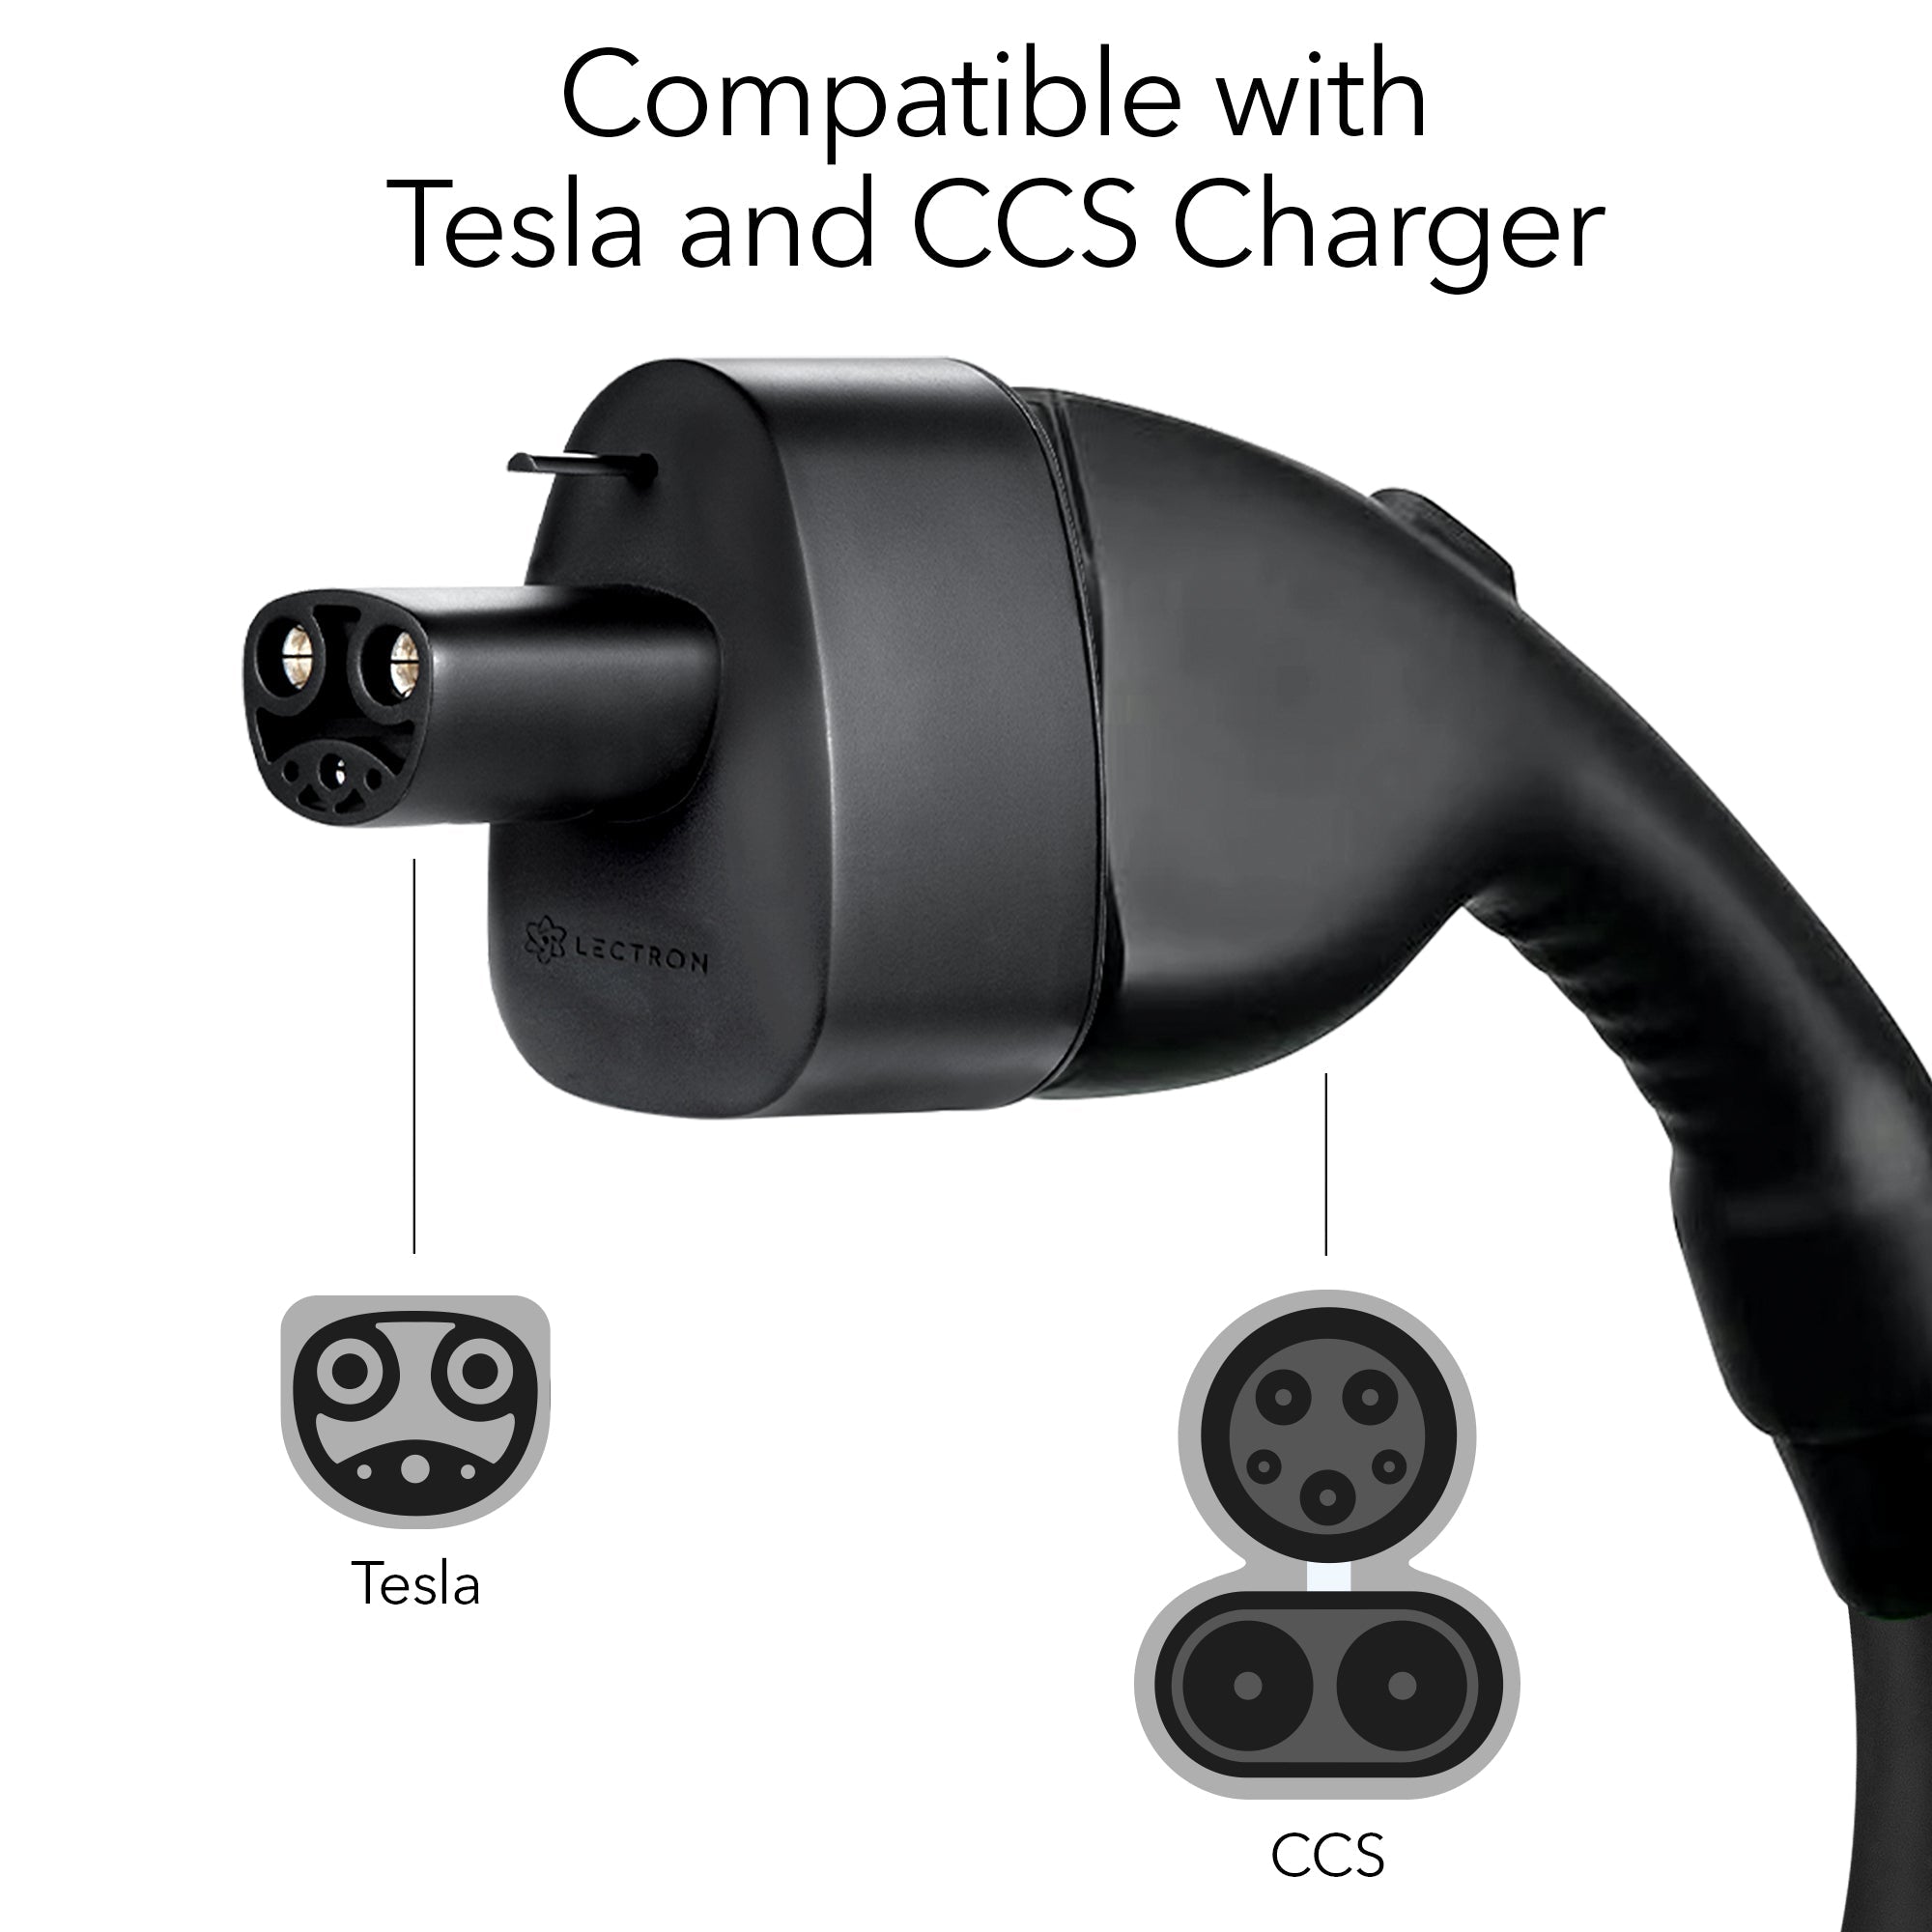 CCS1 to Tesla Charger Adapter